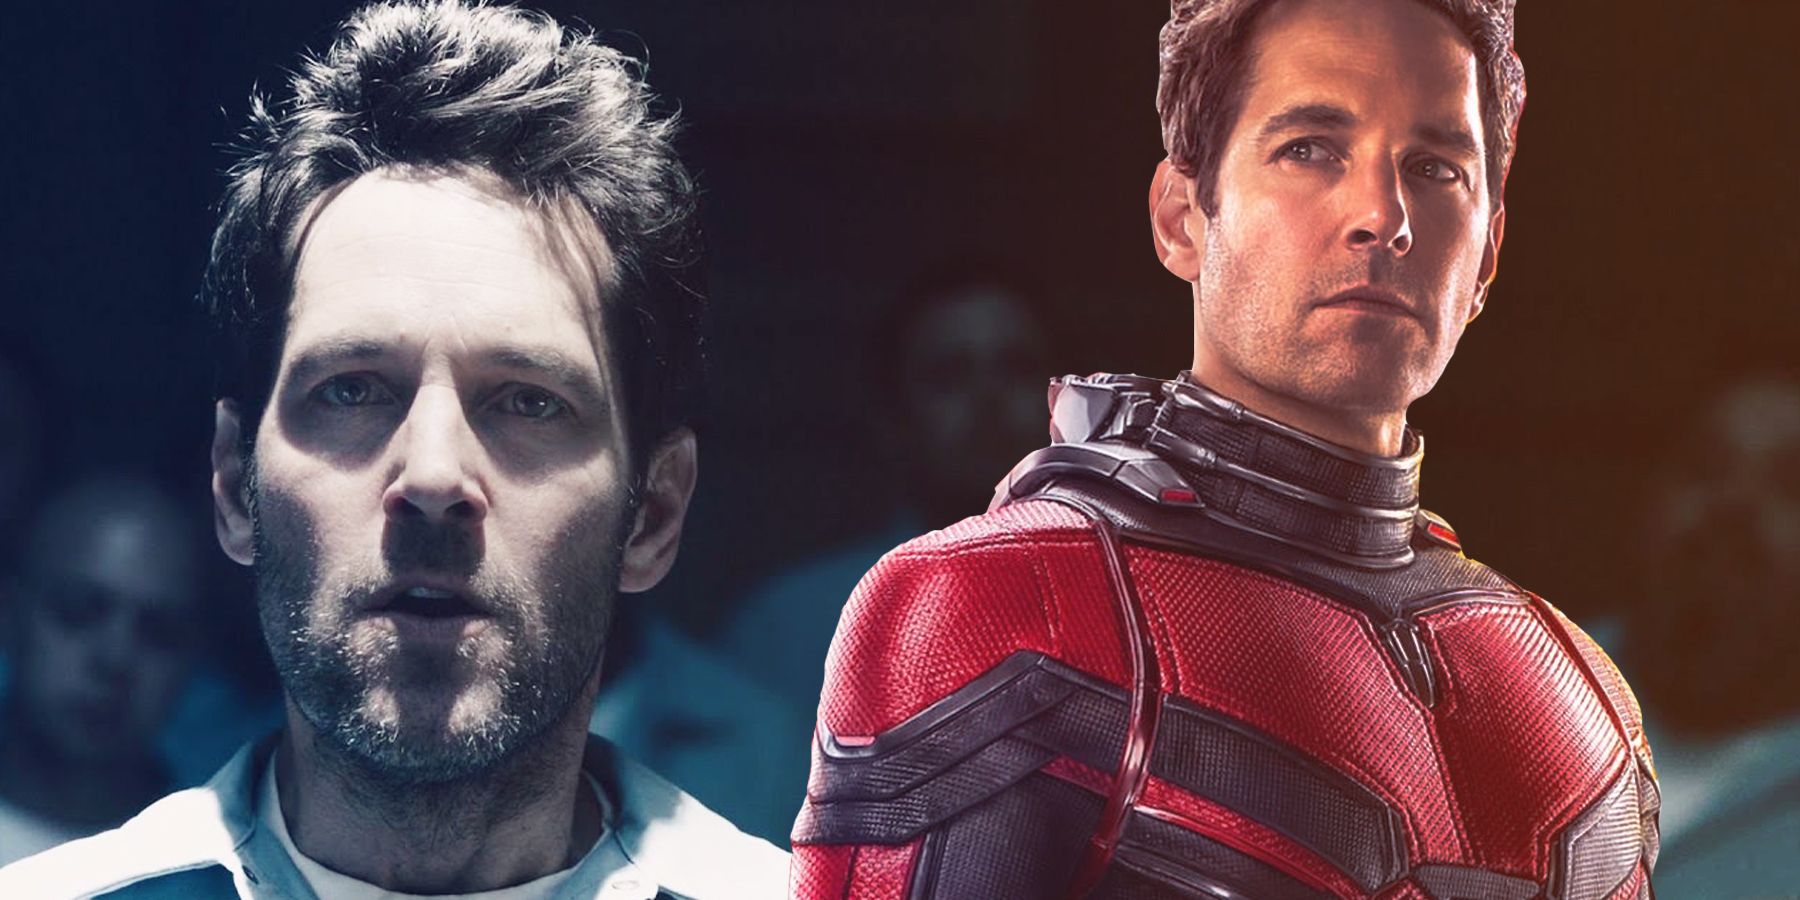 Scott Lang in jail and as Ant-Man